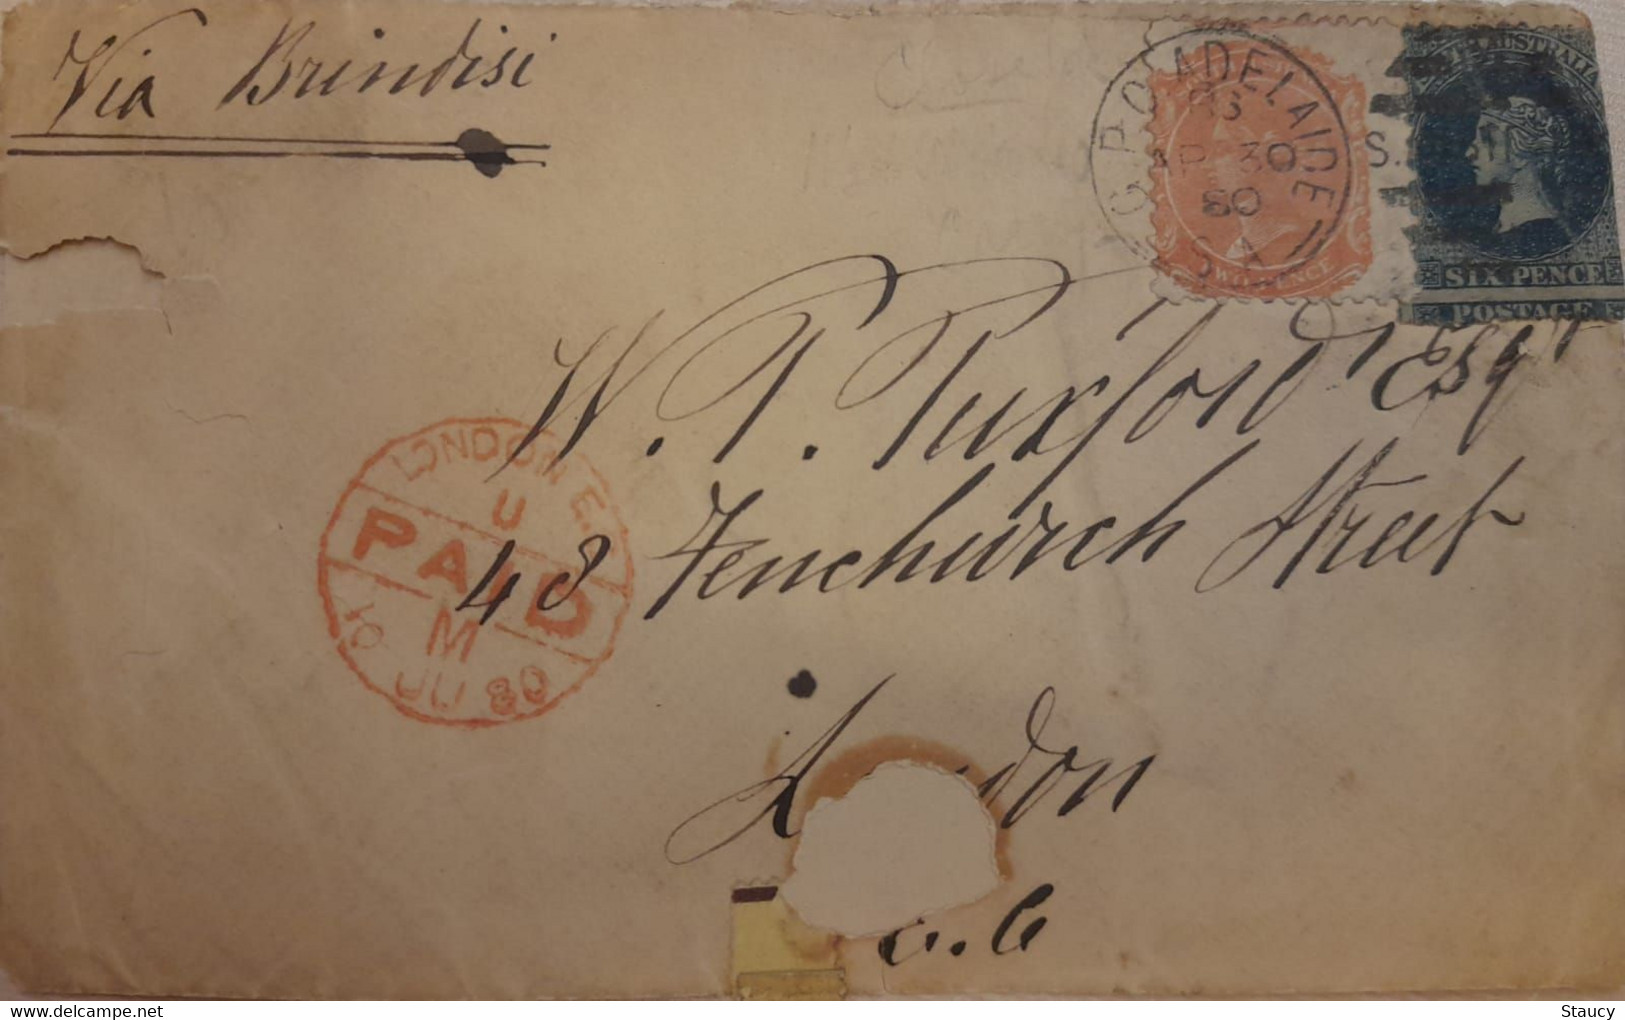 SOUTH AUSTRALIA 1880 QV 6d Blue + 2d ORANGE Franked On Cover Adelaide To LONDON Via Brindisi "LONDON PAID" As Per Scan - Briefe U. Dokumente